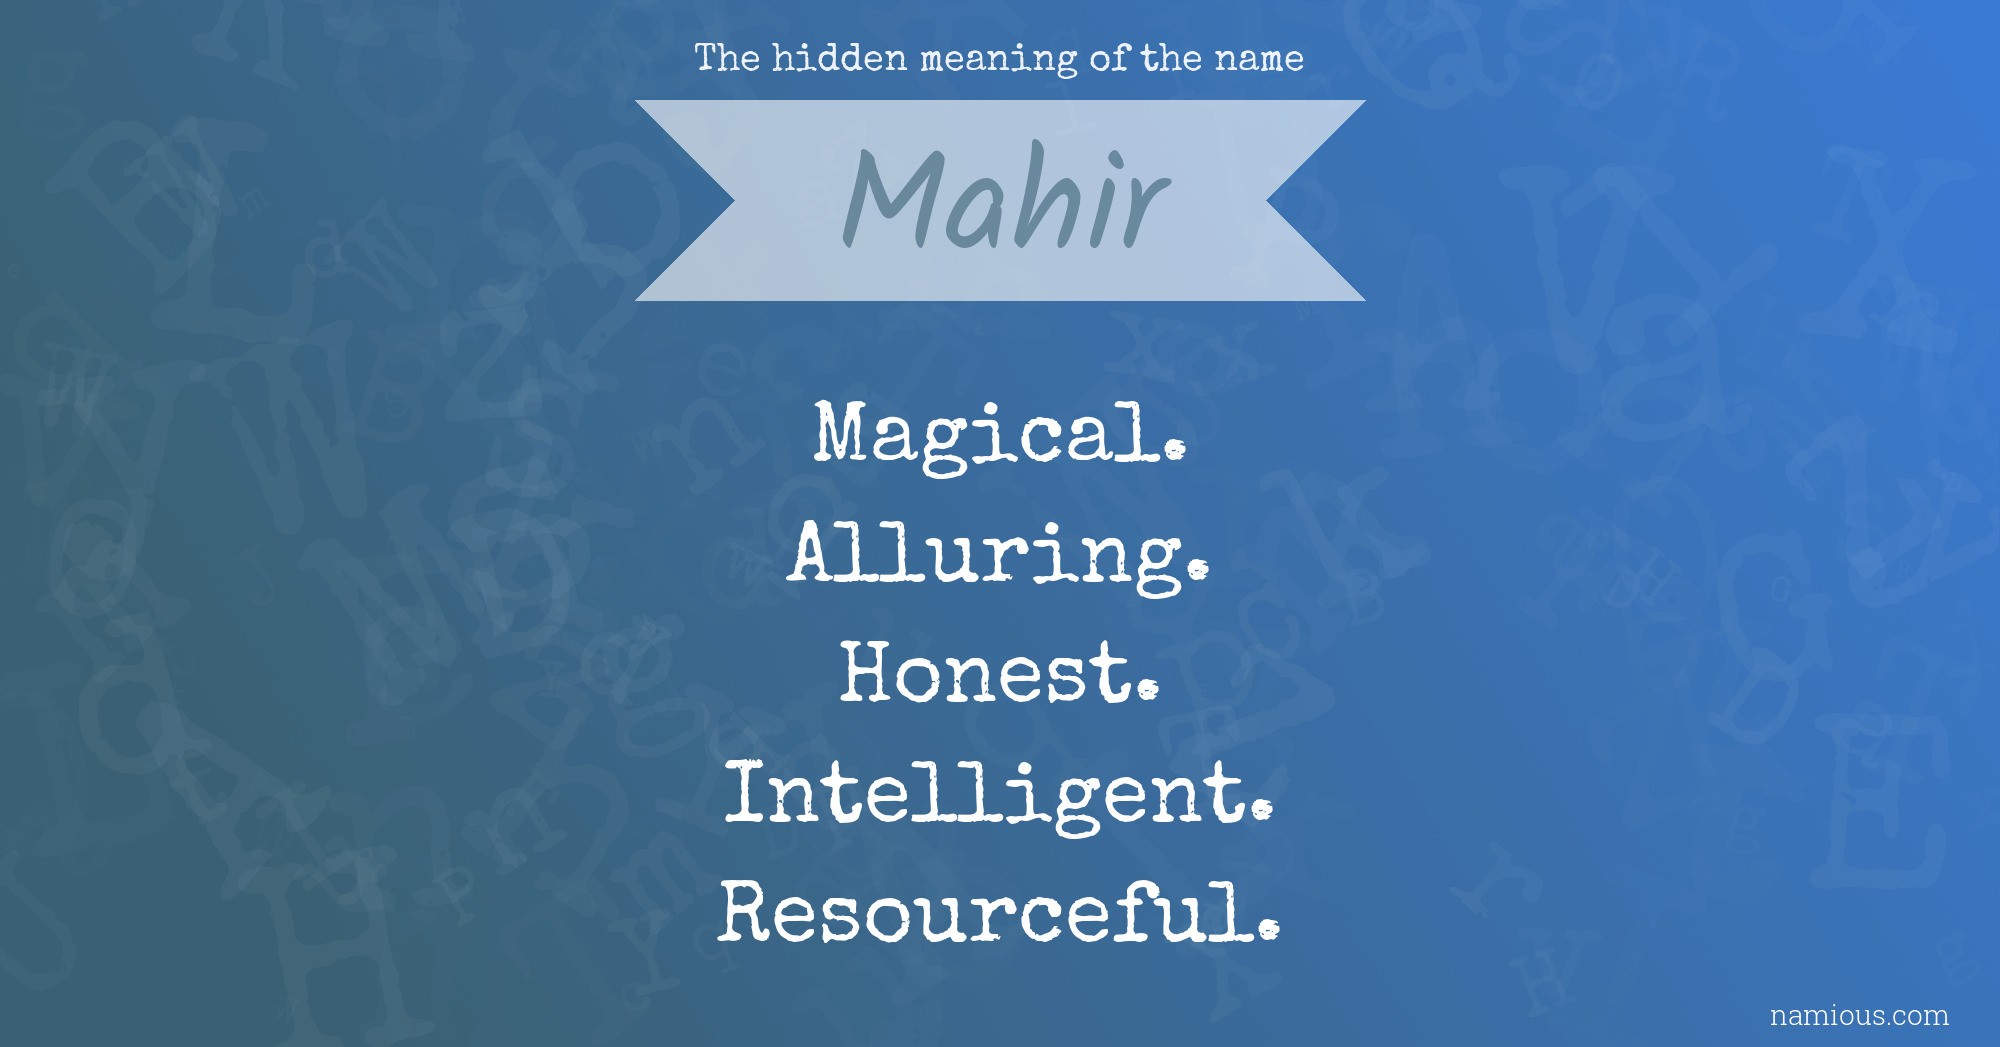 The hidden meaning of the name Mahir